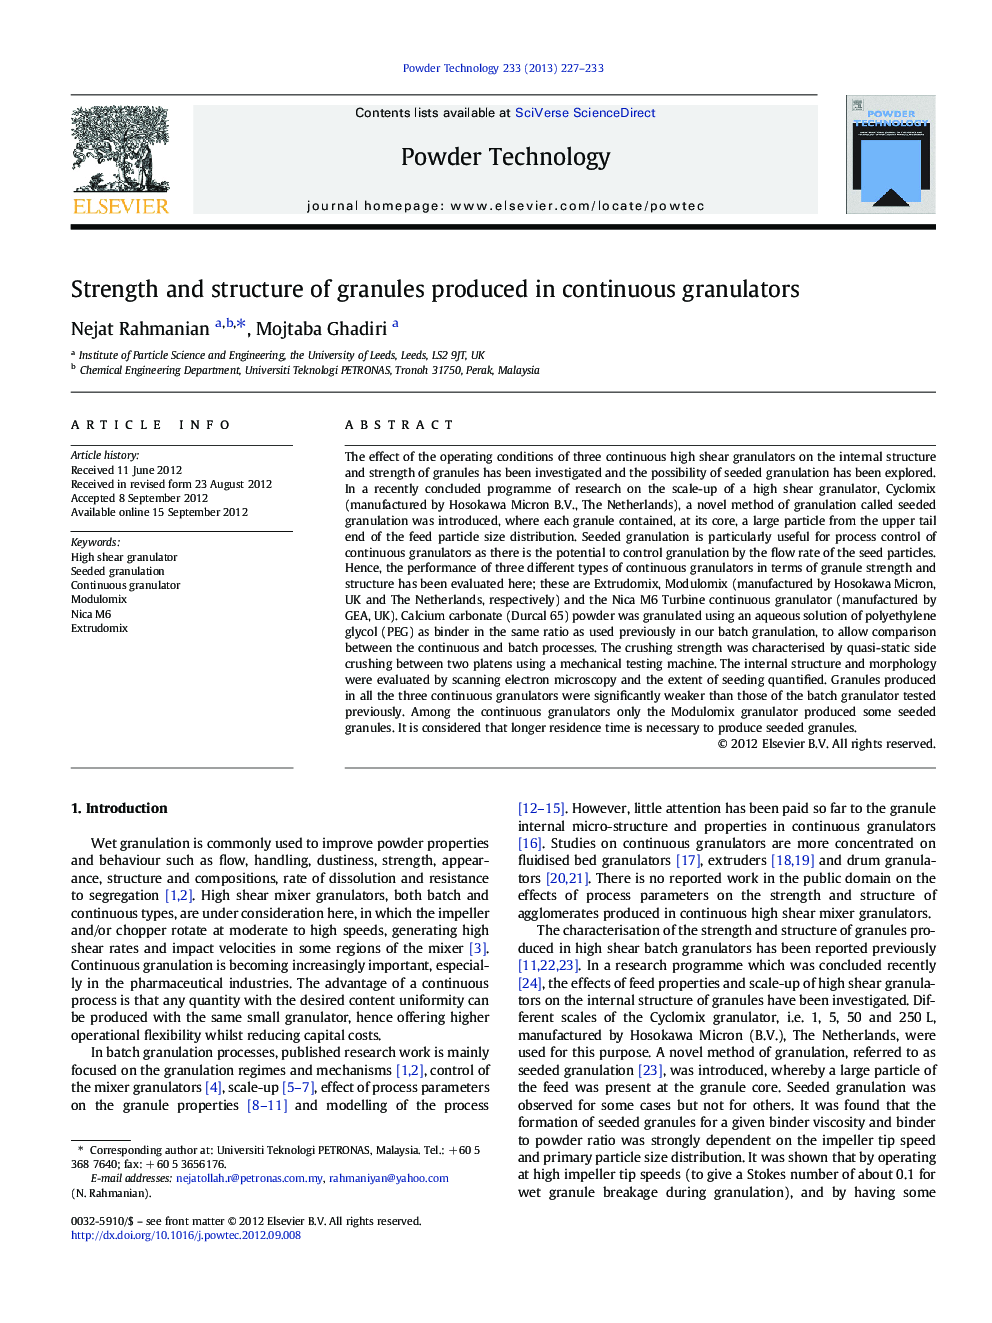 Strength and structure of granules produced in continuous granulators